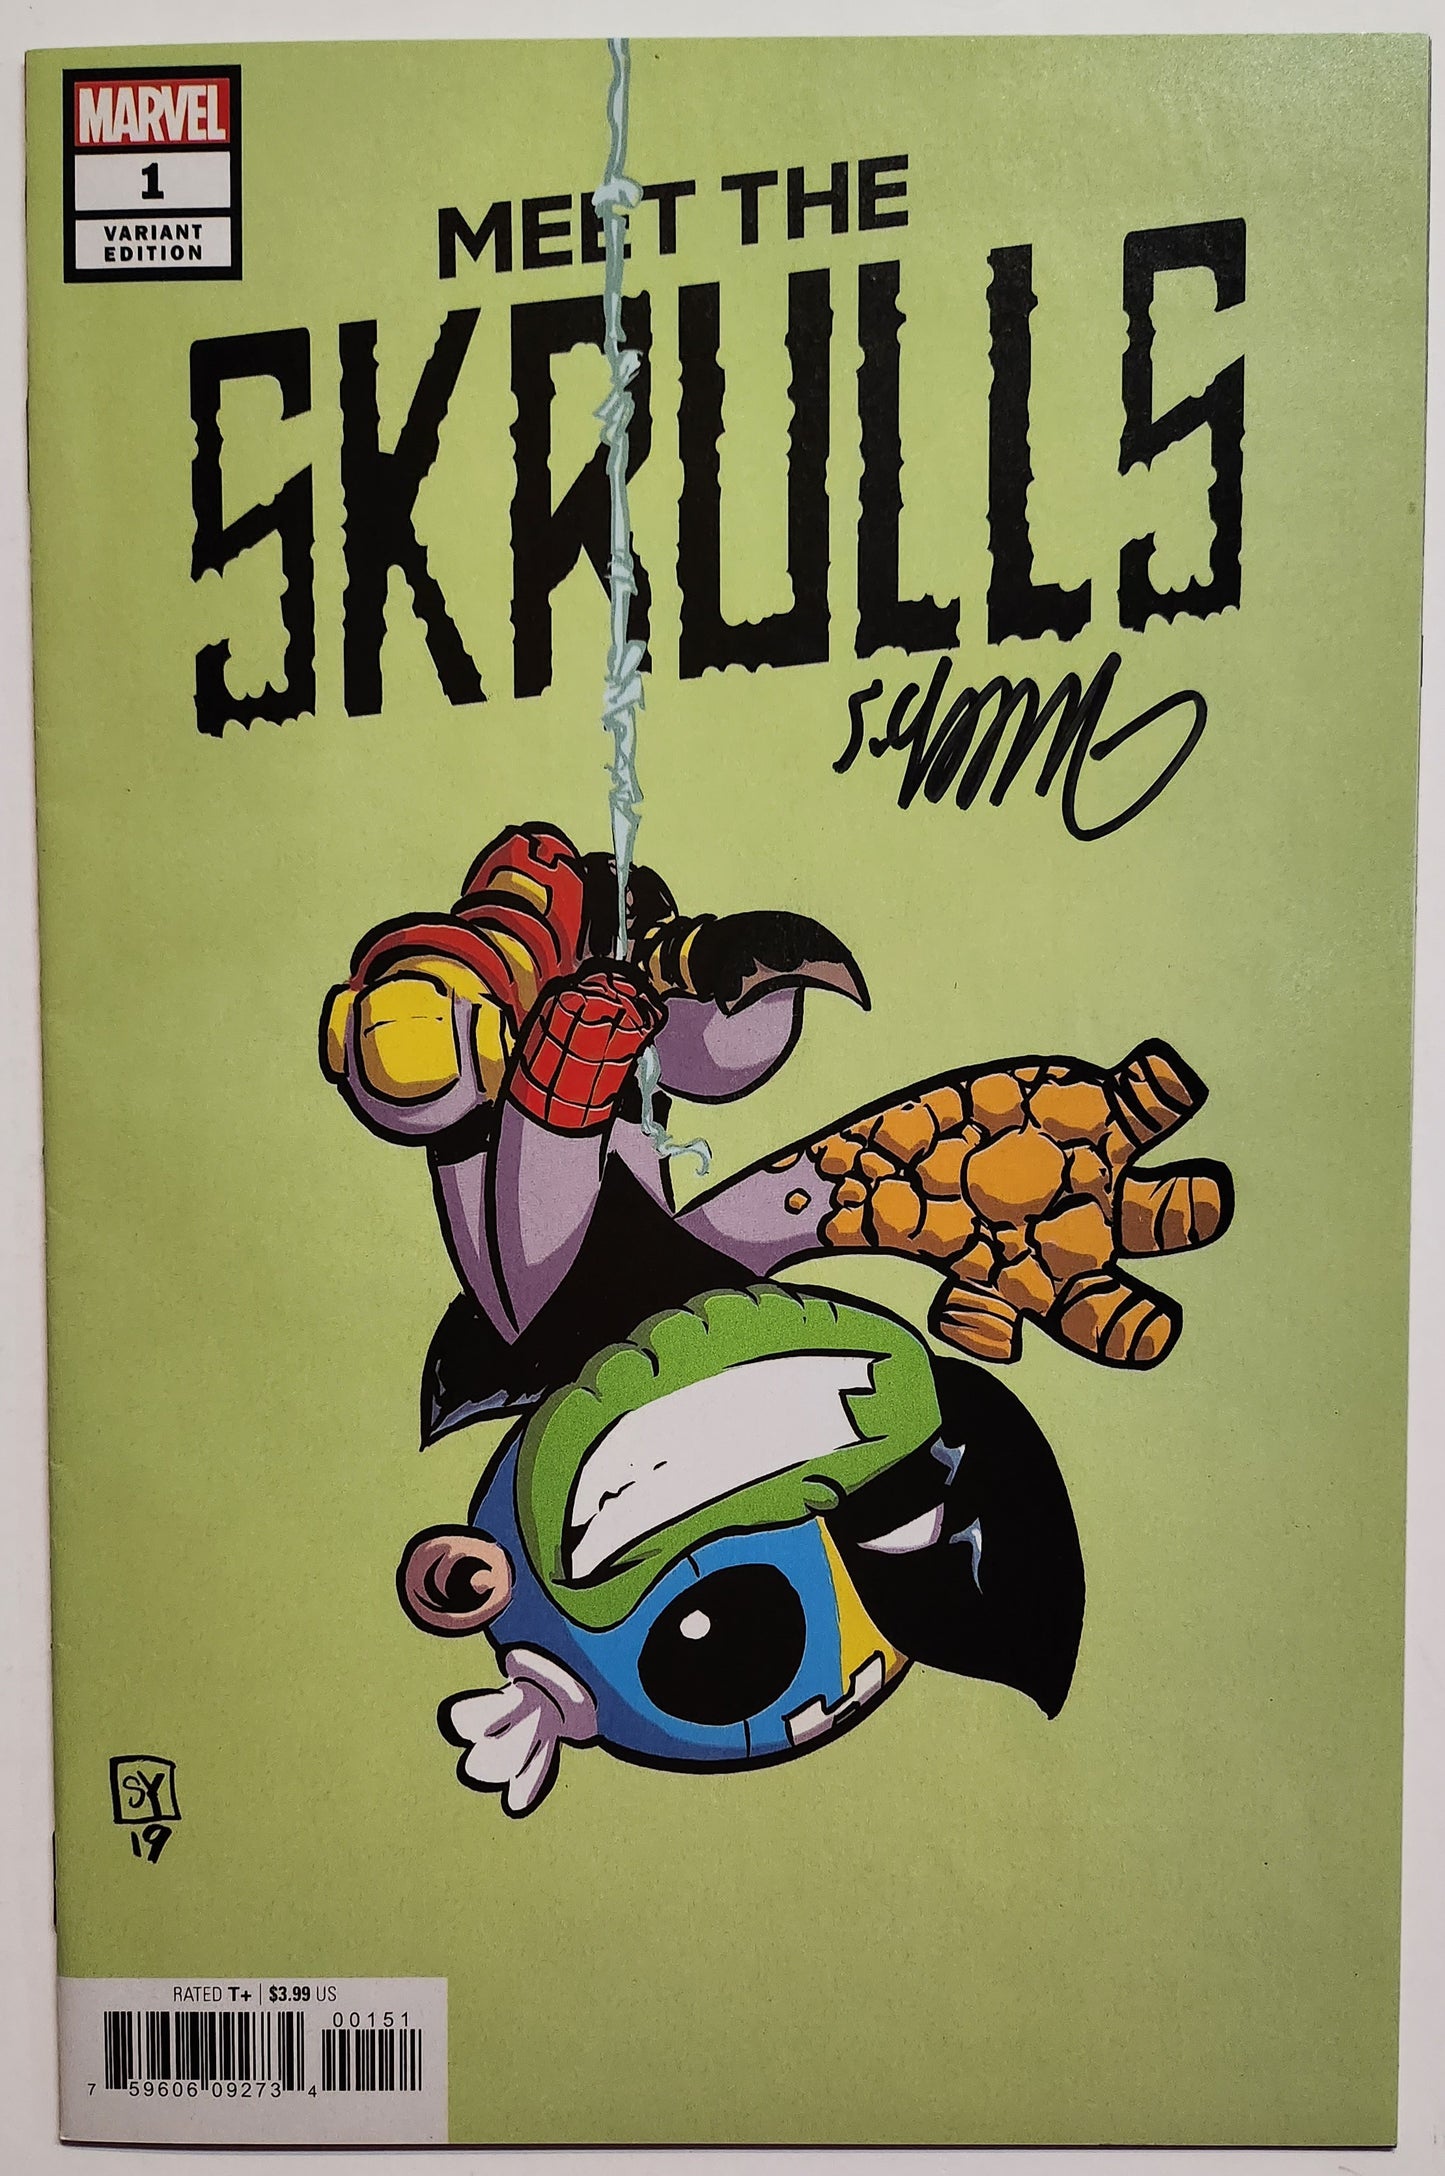 MEET THE SKRULLS #1 VARIANT 2019 SIGNED BY SKOTTIE YOUNG